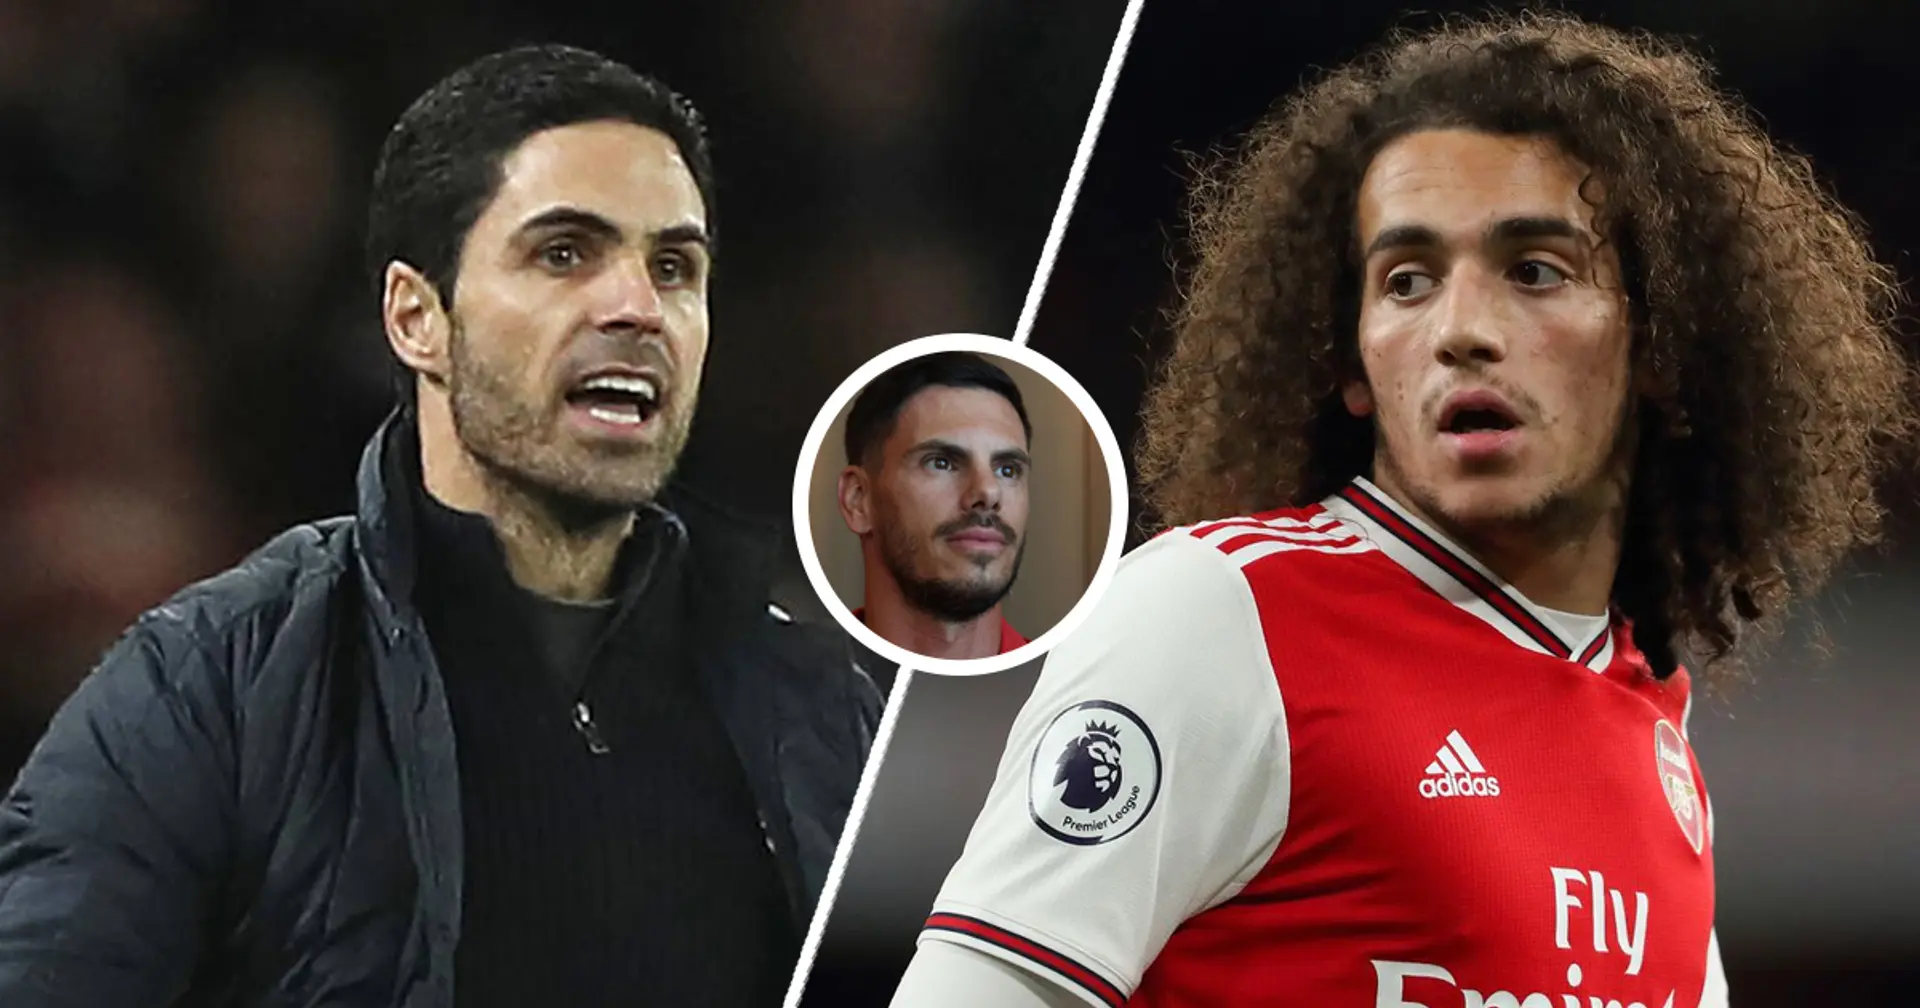 'I just feel Matteo hasn’t grown up as a human being yet': Jeremie Aliadiere warns Guendouzi of his off-pitch behaviour not to ruin his career